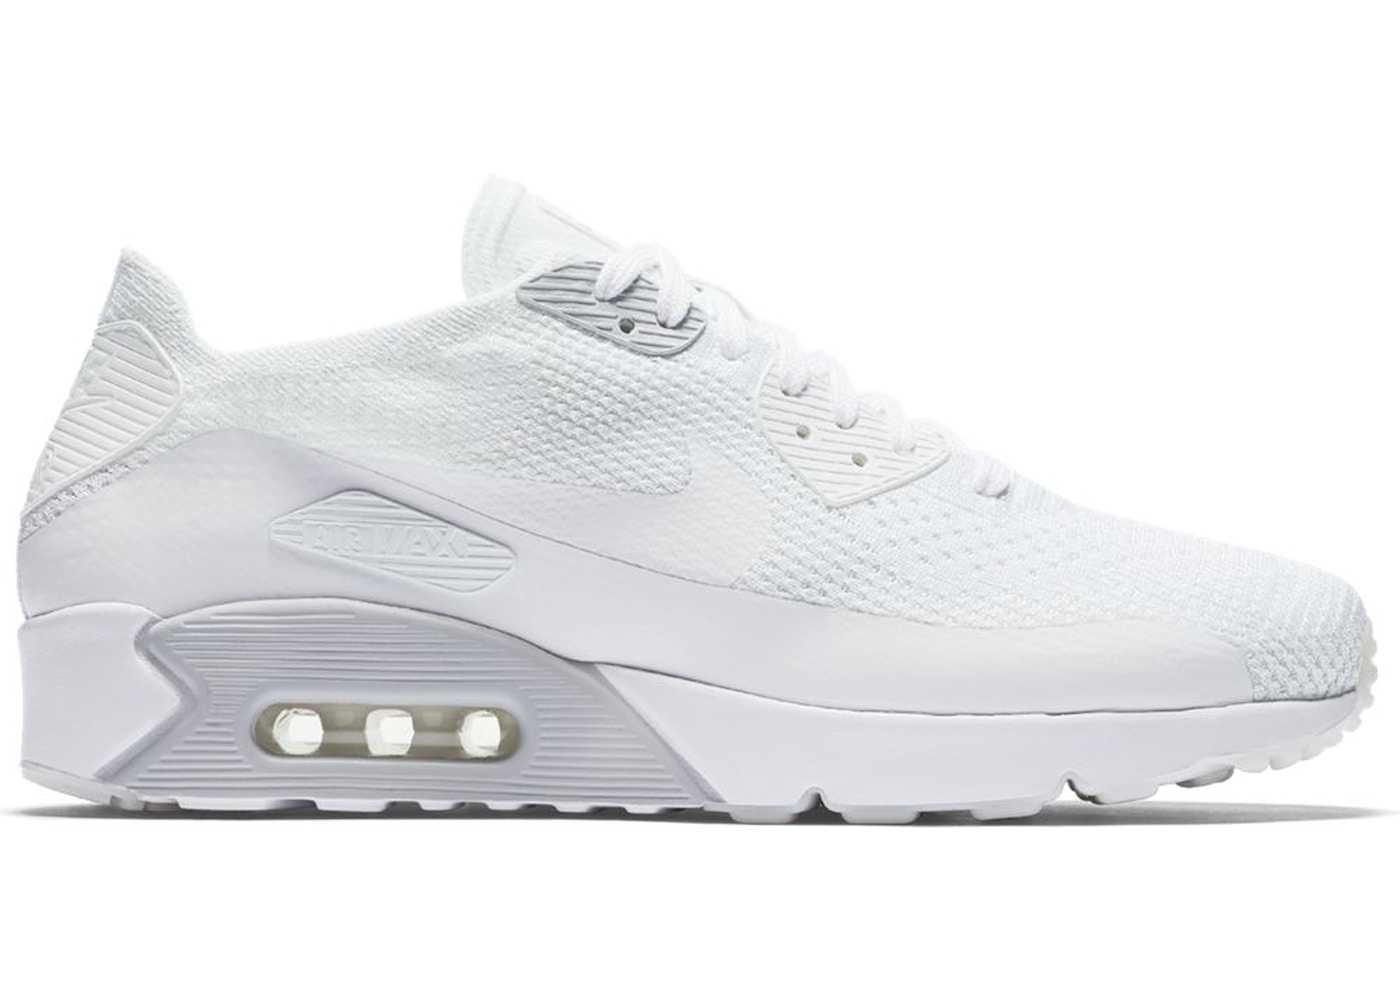 Nike Air Max 90 Ultra 2.0 Flyknit White - 875943-101